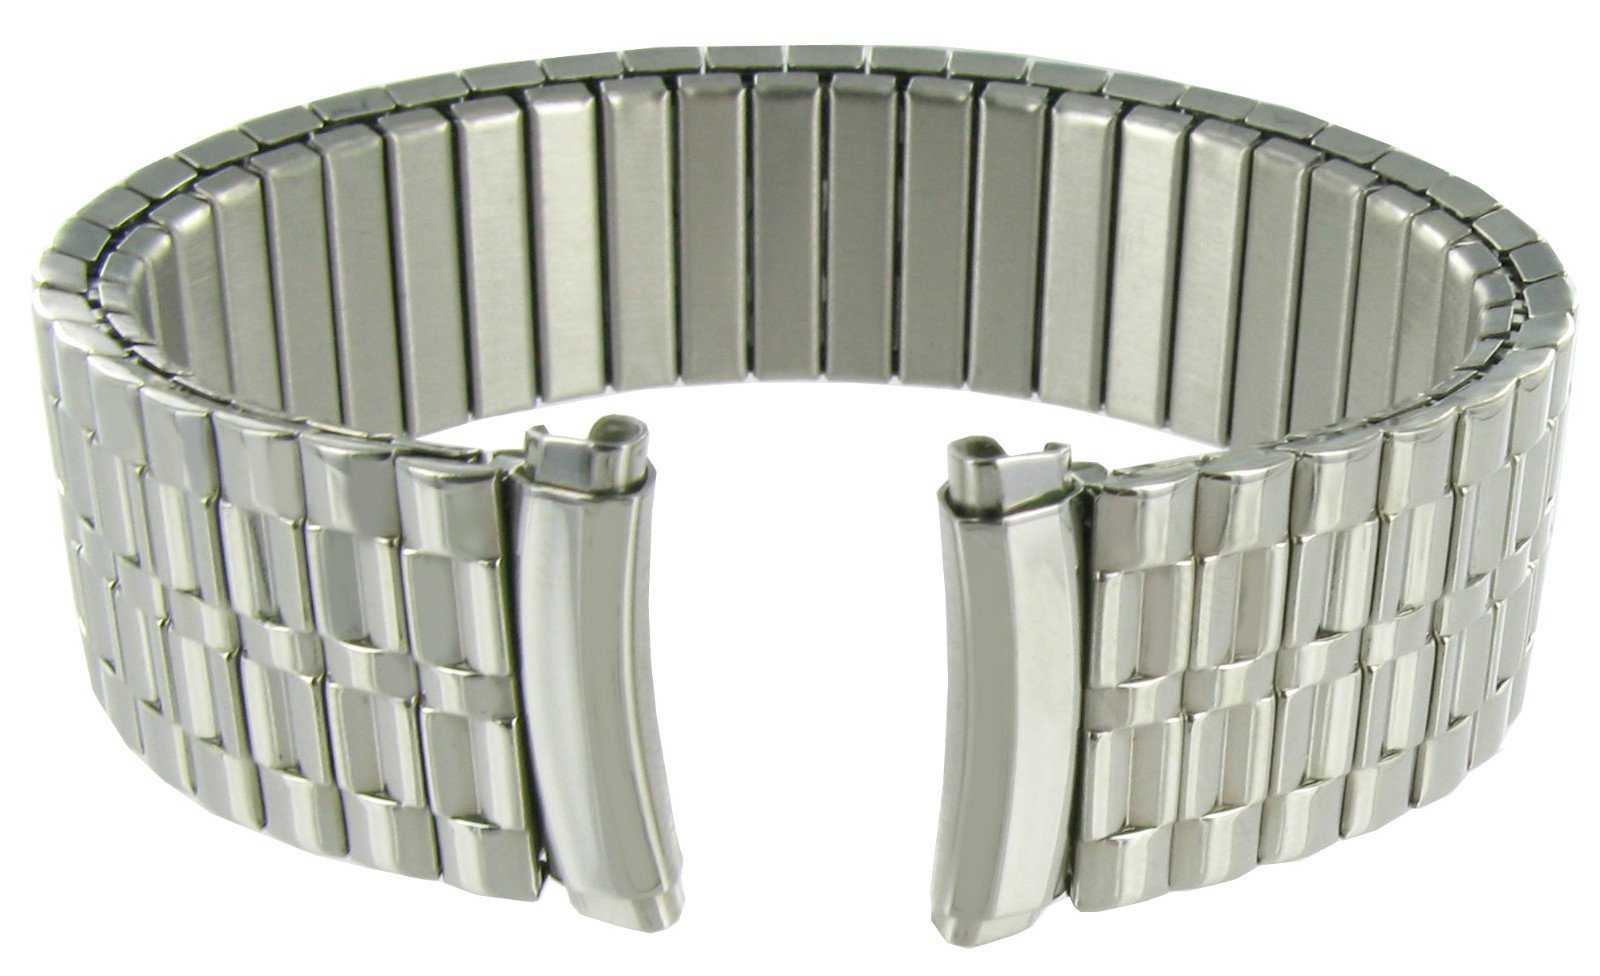 16-20mm Stainless Steel Adjustable Curved End Twist-O-Flex Men's Watch Band